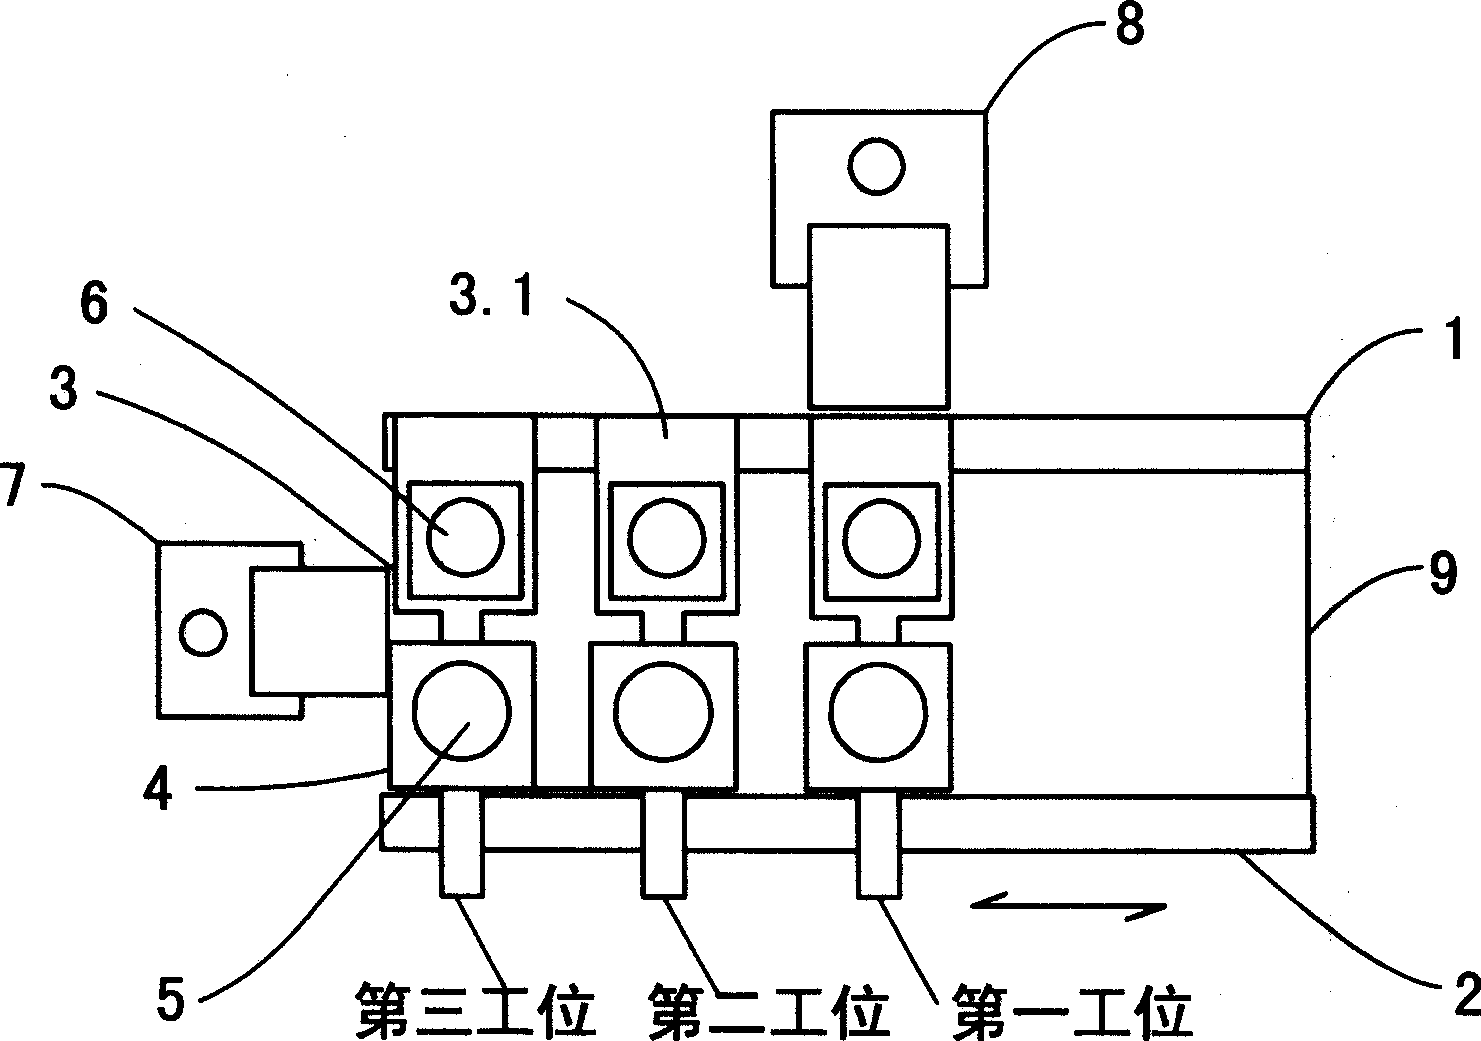 Machine for processing and squeezing pumping rod with three stations